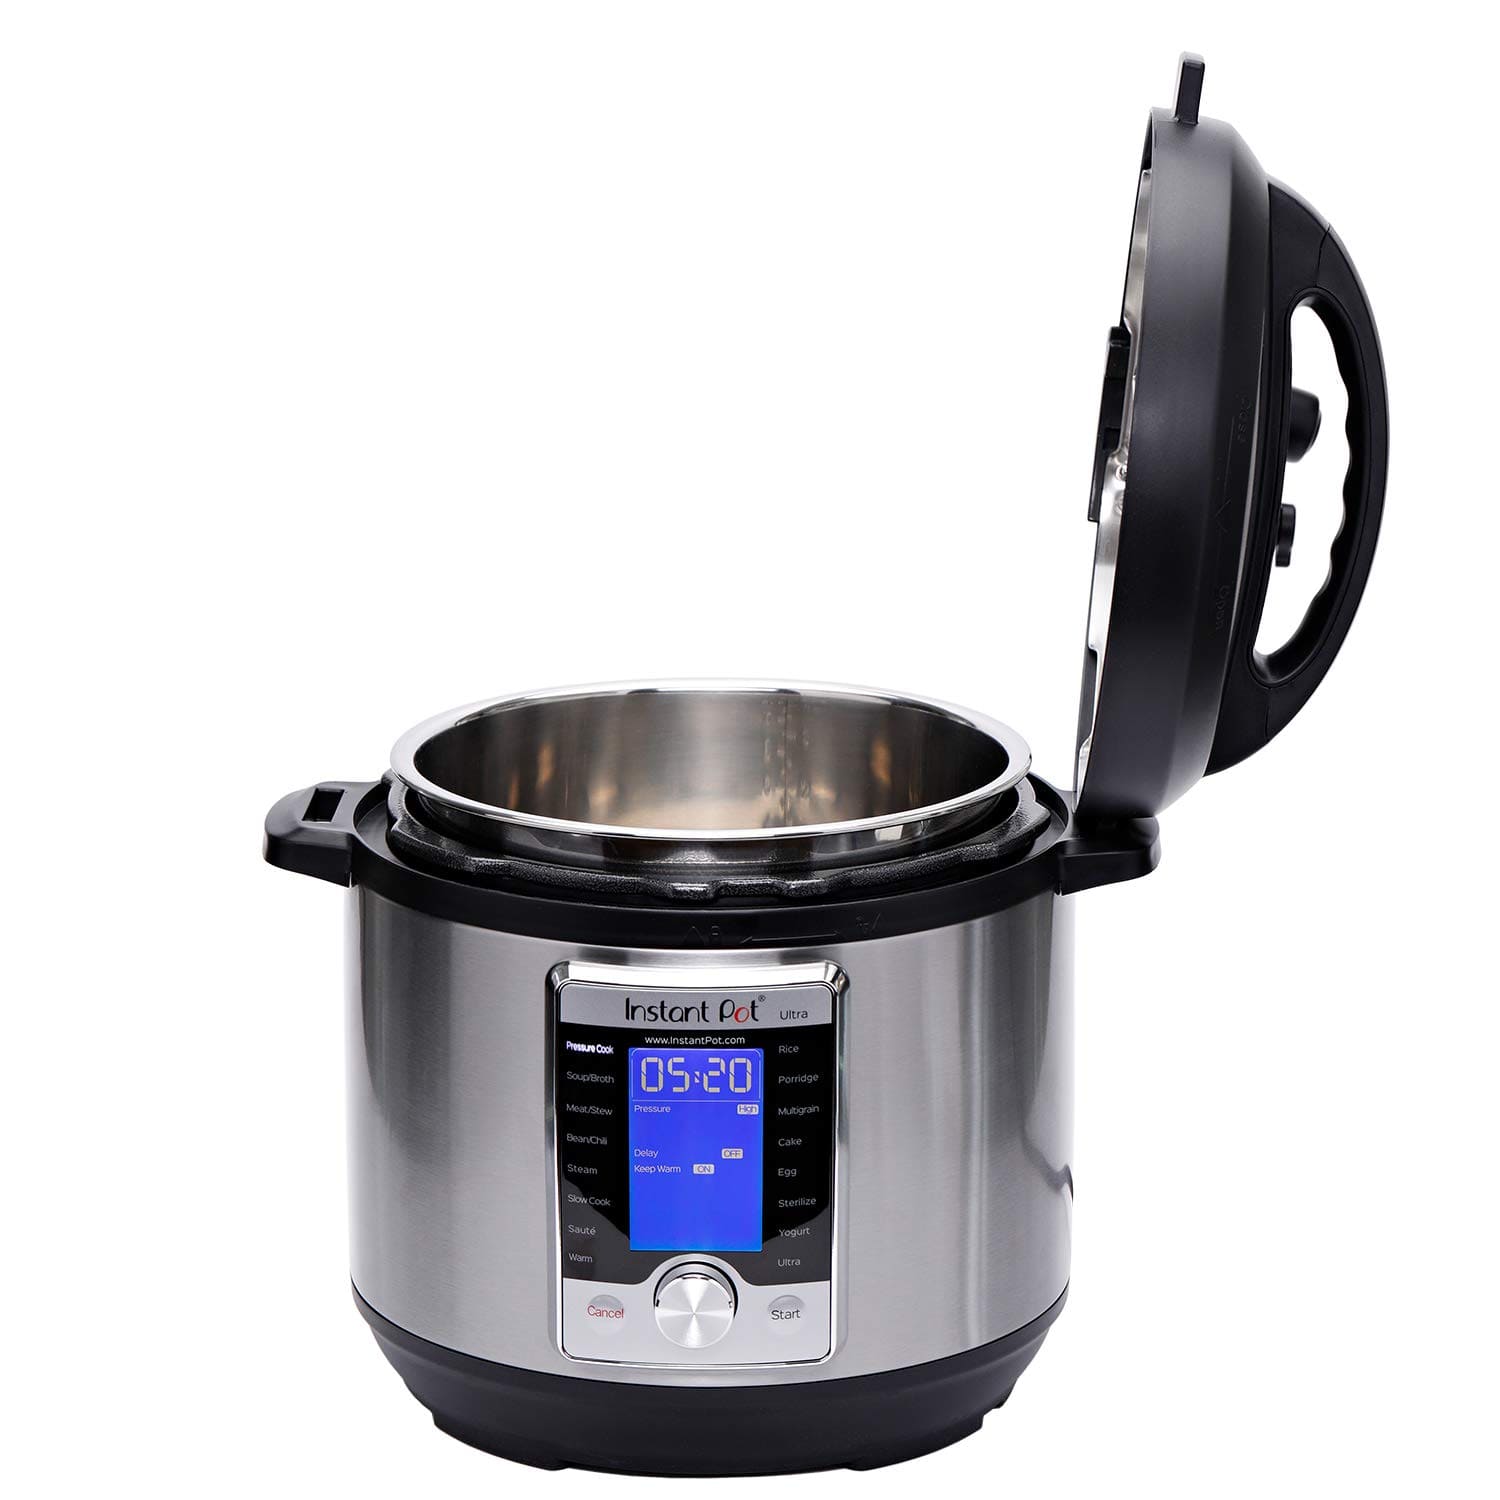 Instant Pot Ultra, 10-in-1 Pressure Cooker, Slow Cooker, Rice